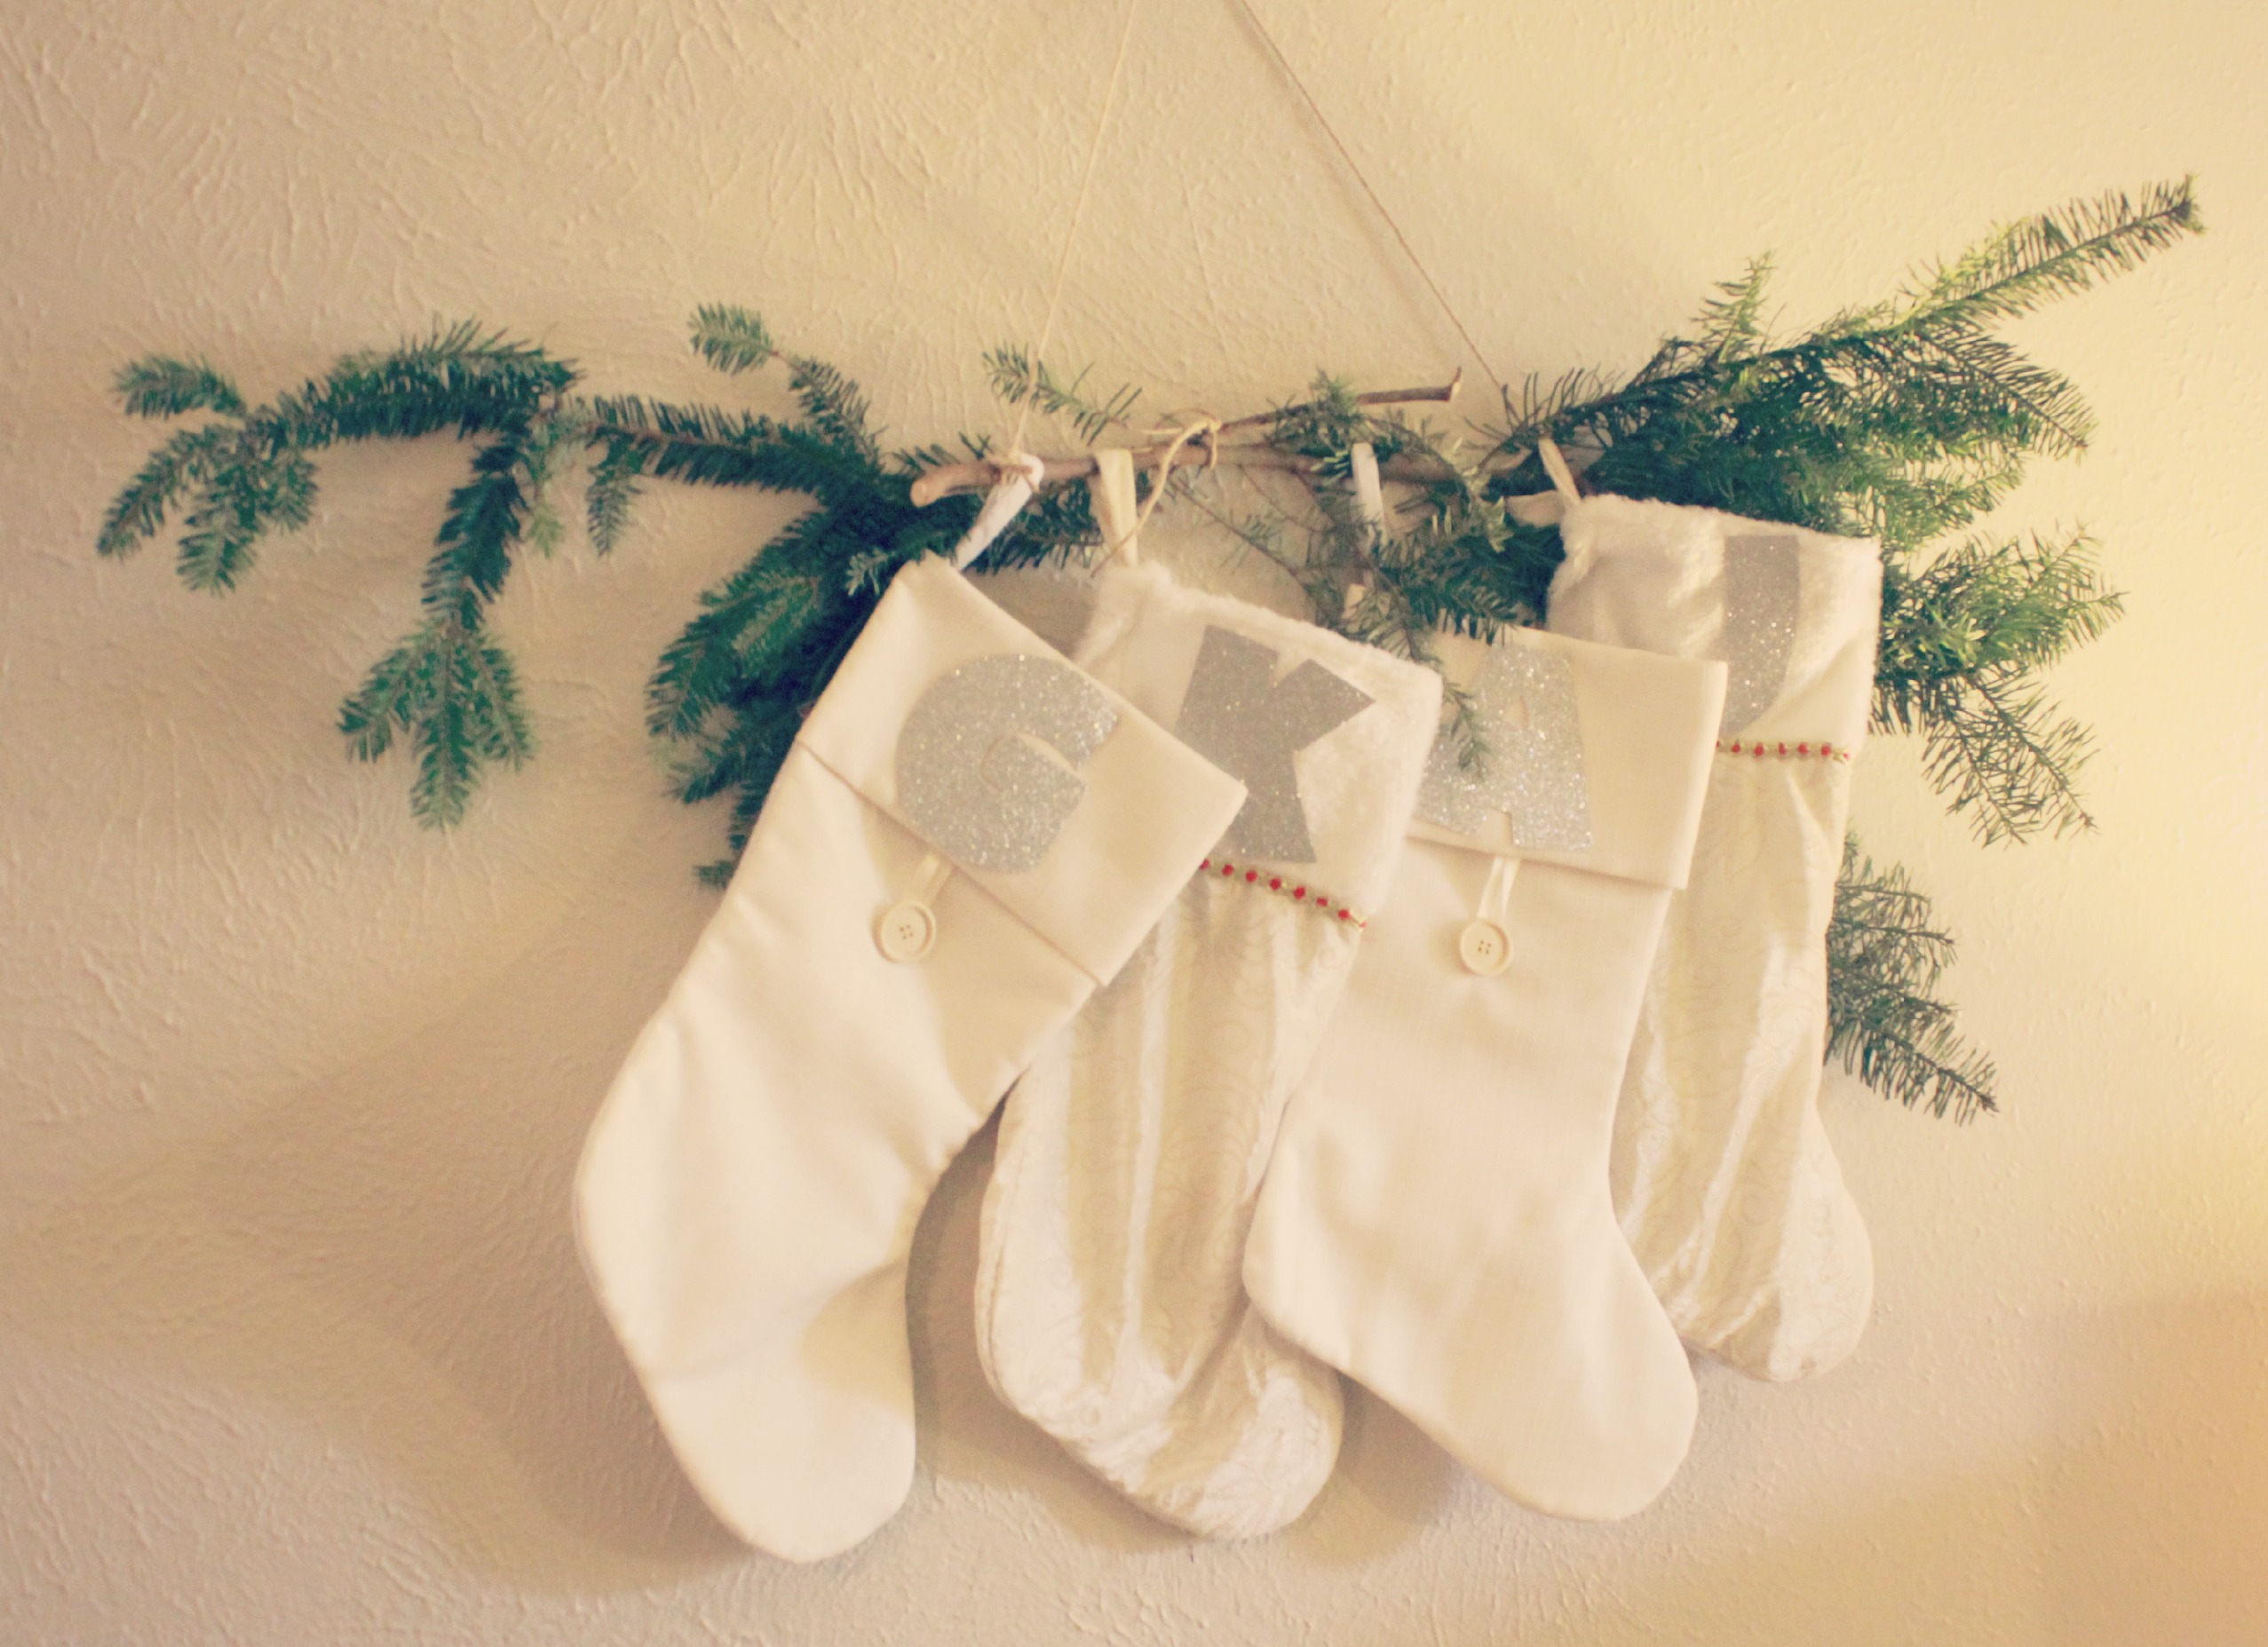 Stockings on a branch